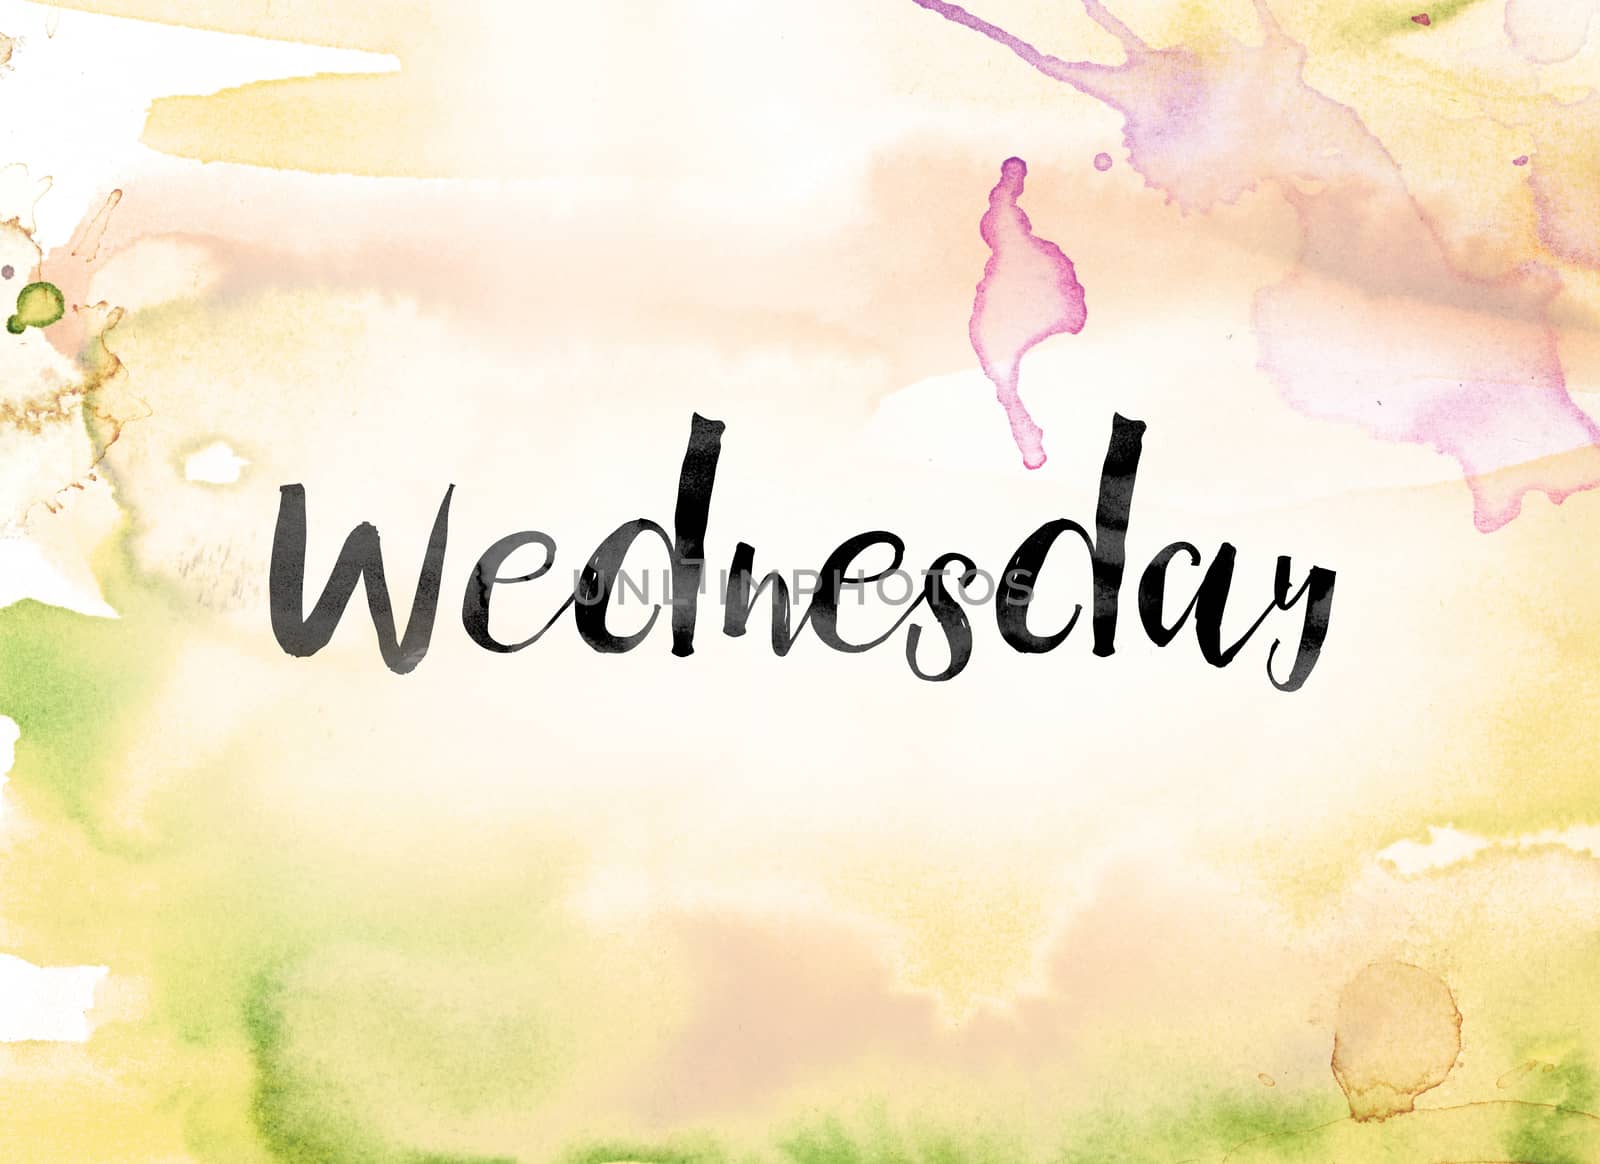 Wednesday Colorful Watercolor and Ink Word Art by enterlinedesign